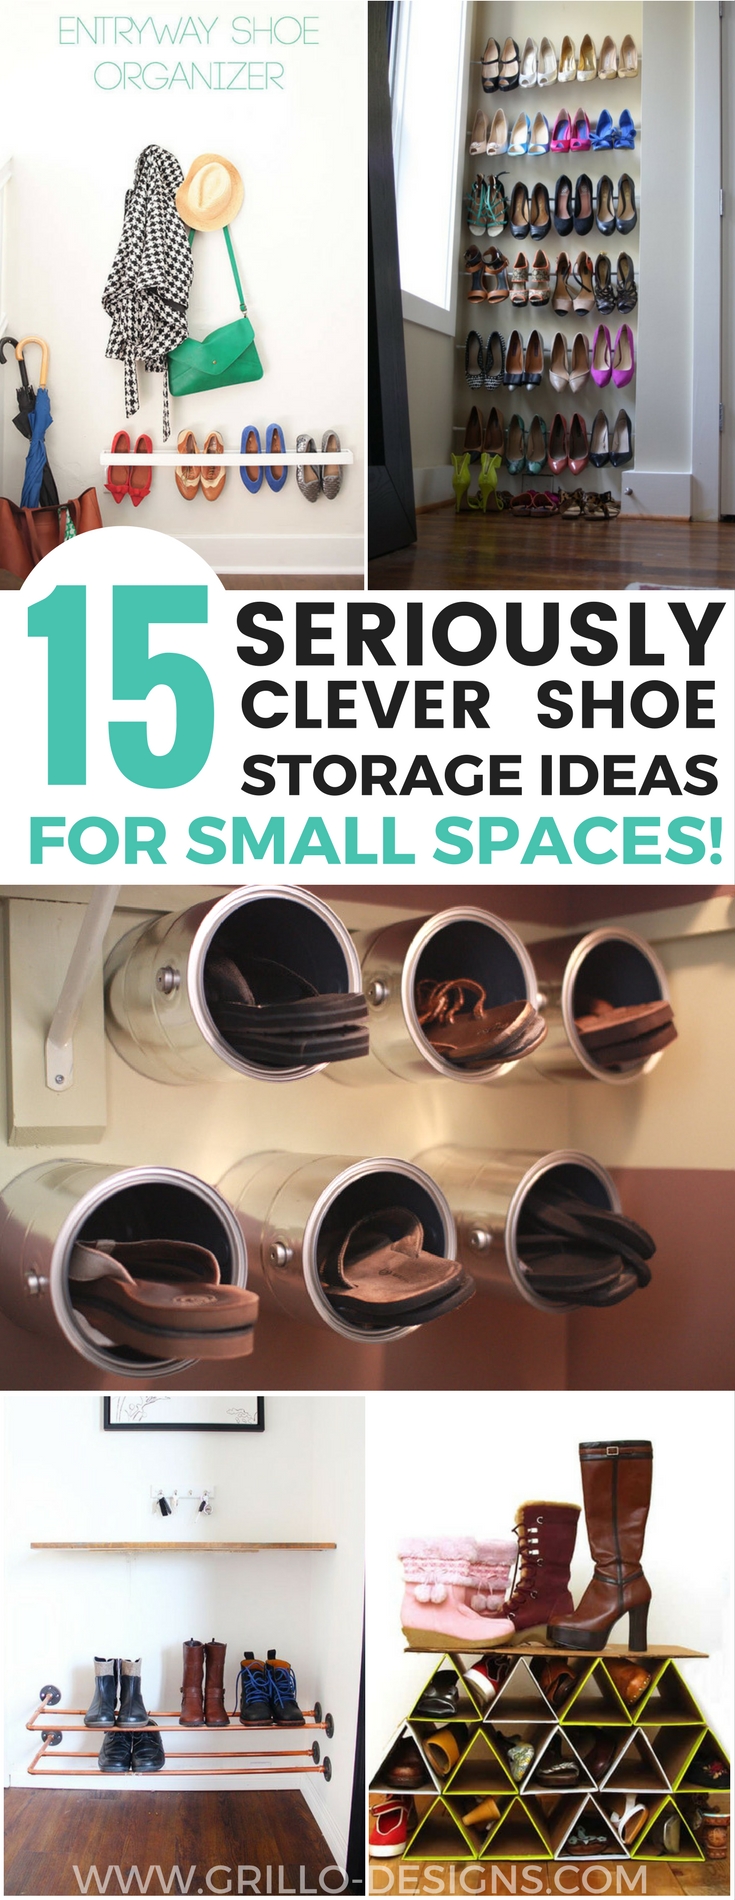 https://grillo-designs.com/wp-content/uploads/2017/09/diy-shoe-storage-ideas-for-small-spaces-in-your-home-grillo-designs.jpg